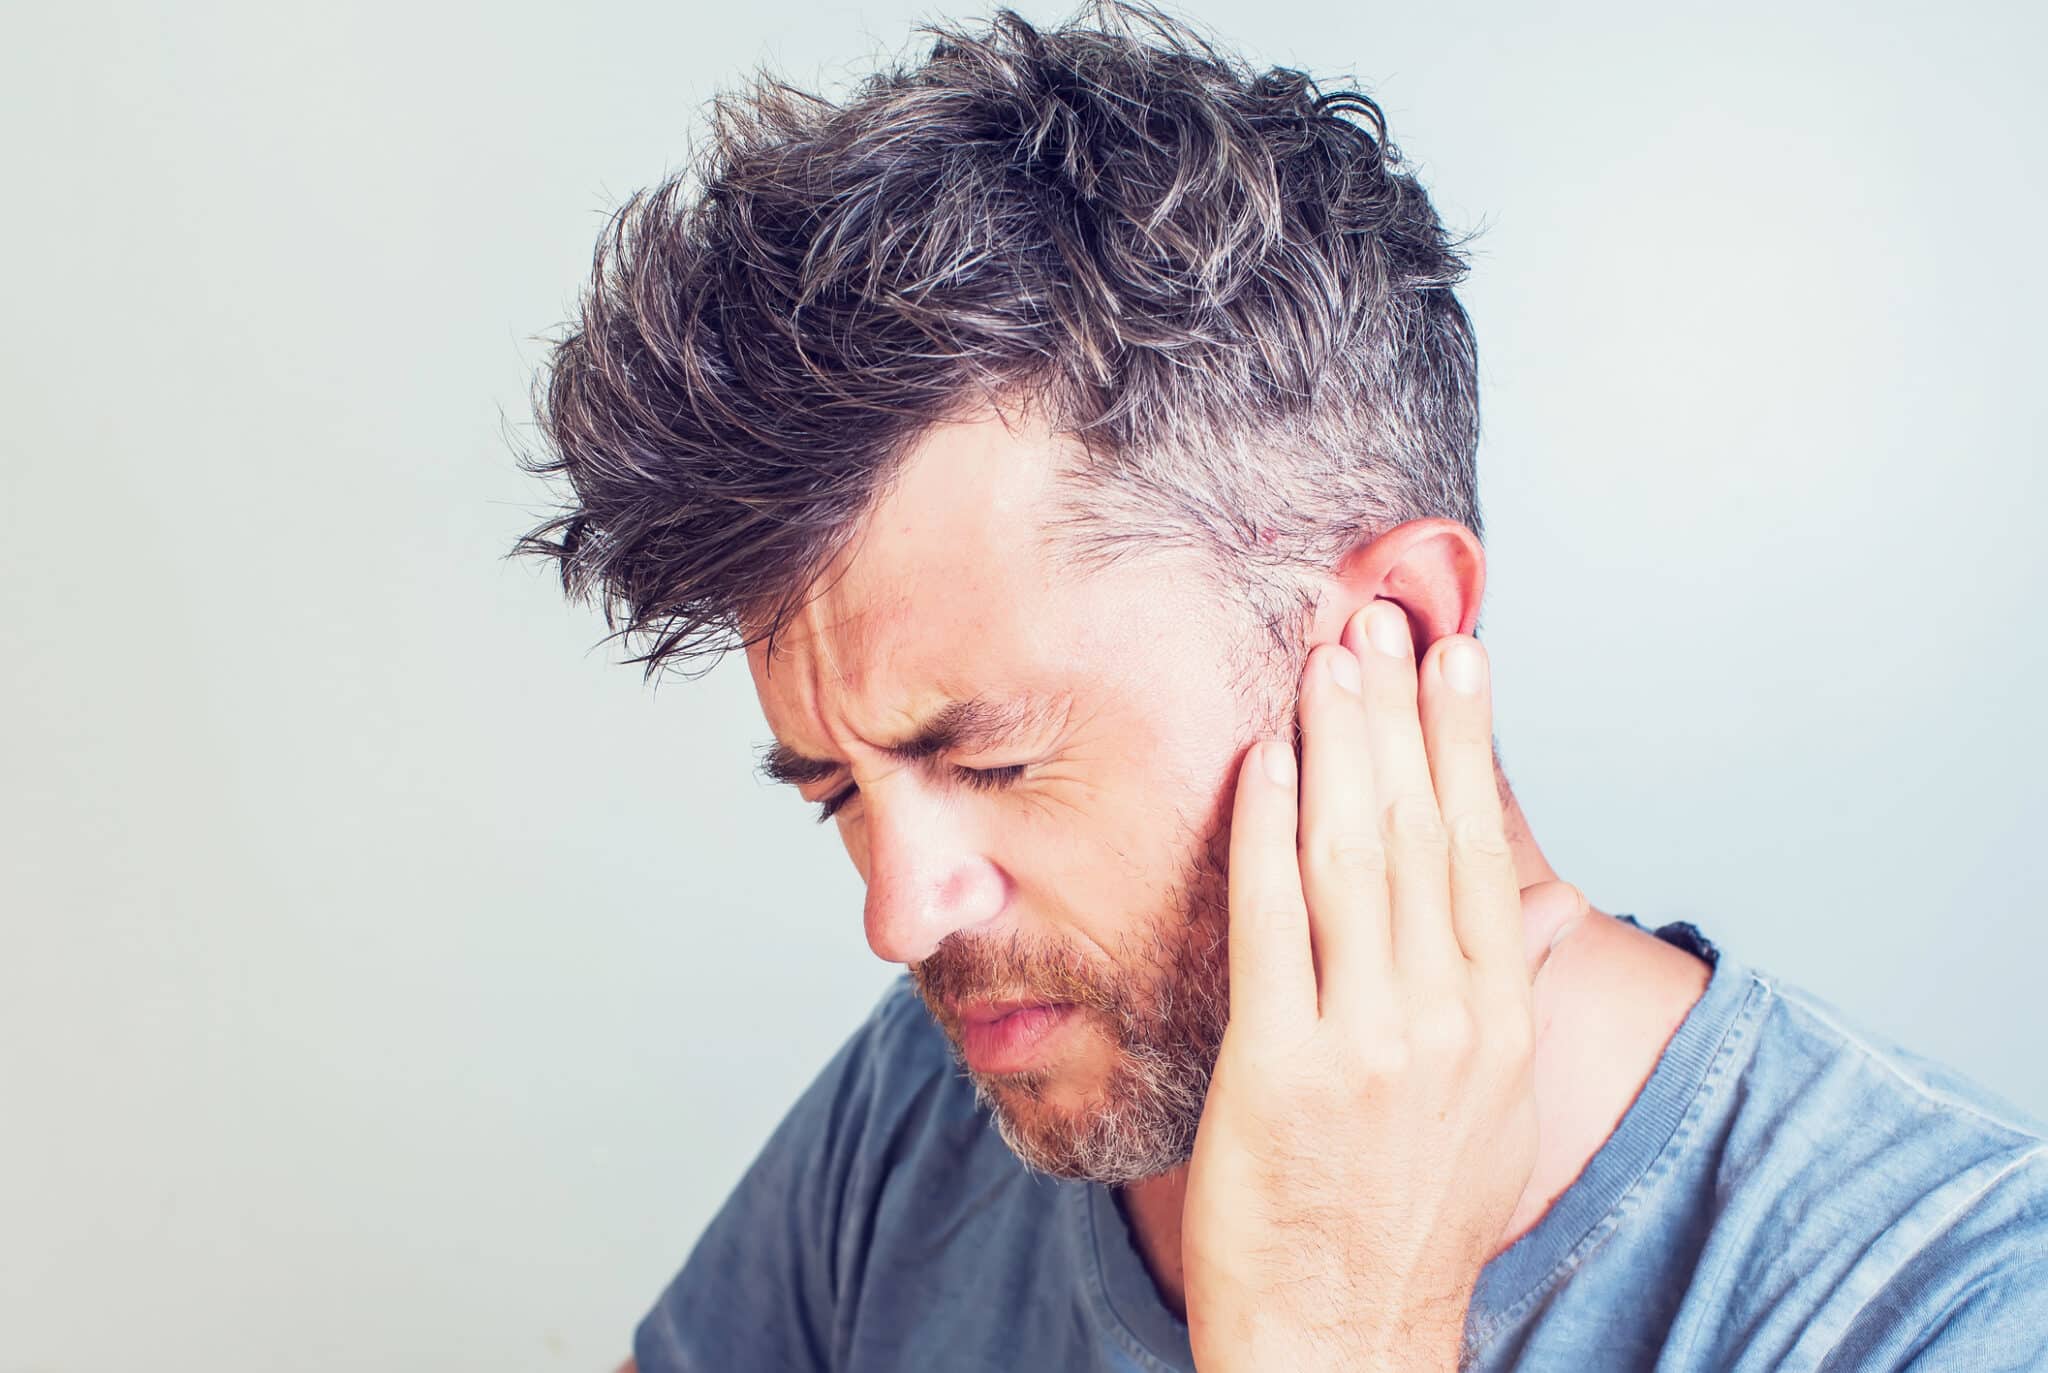 How to Deal with the Emotional Weight of Tinnitus